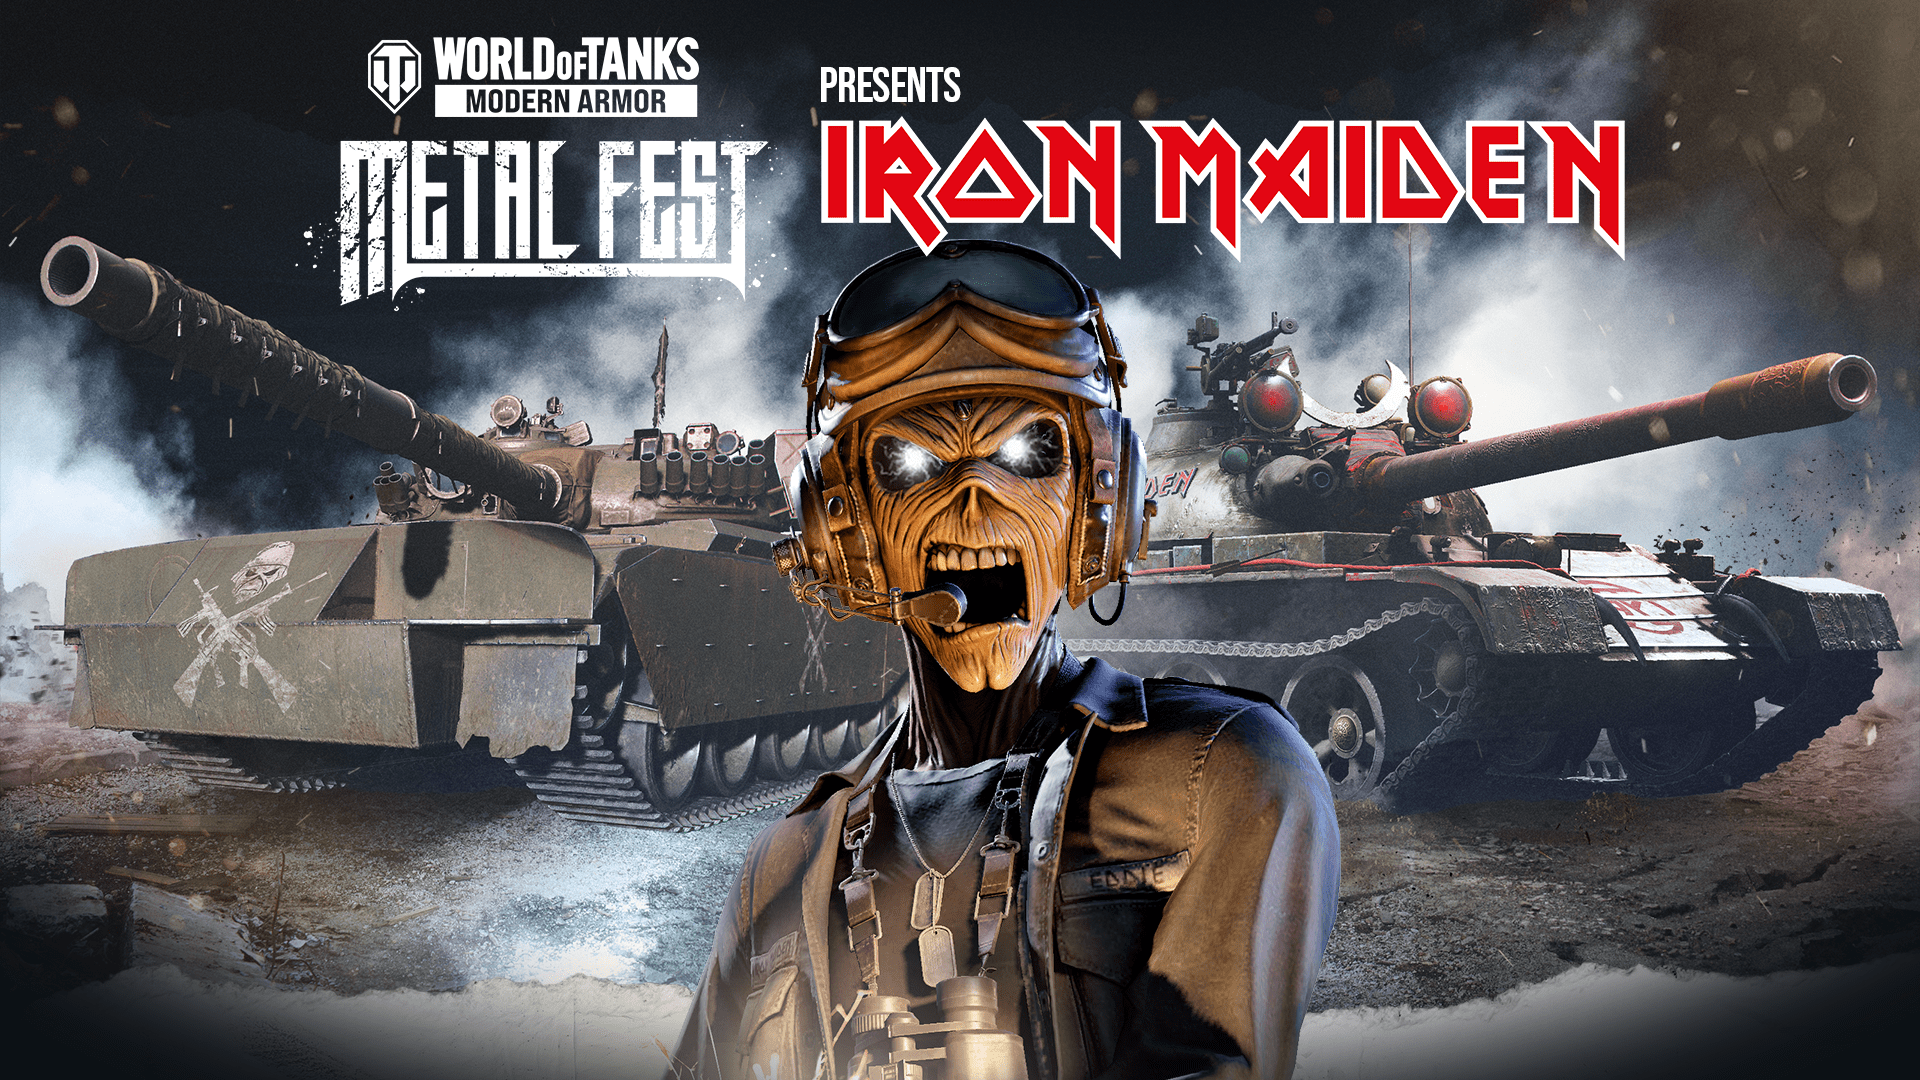 Metal Fest Act 3 Presents IRON MAIDEN: Commanders and Store Bundles